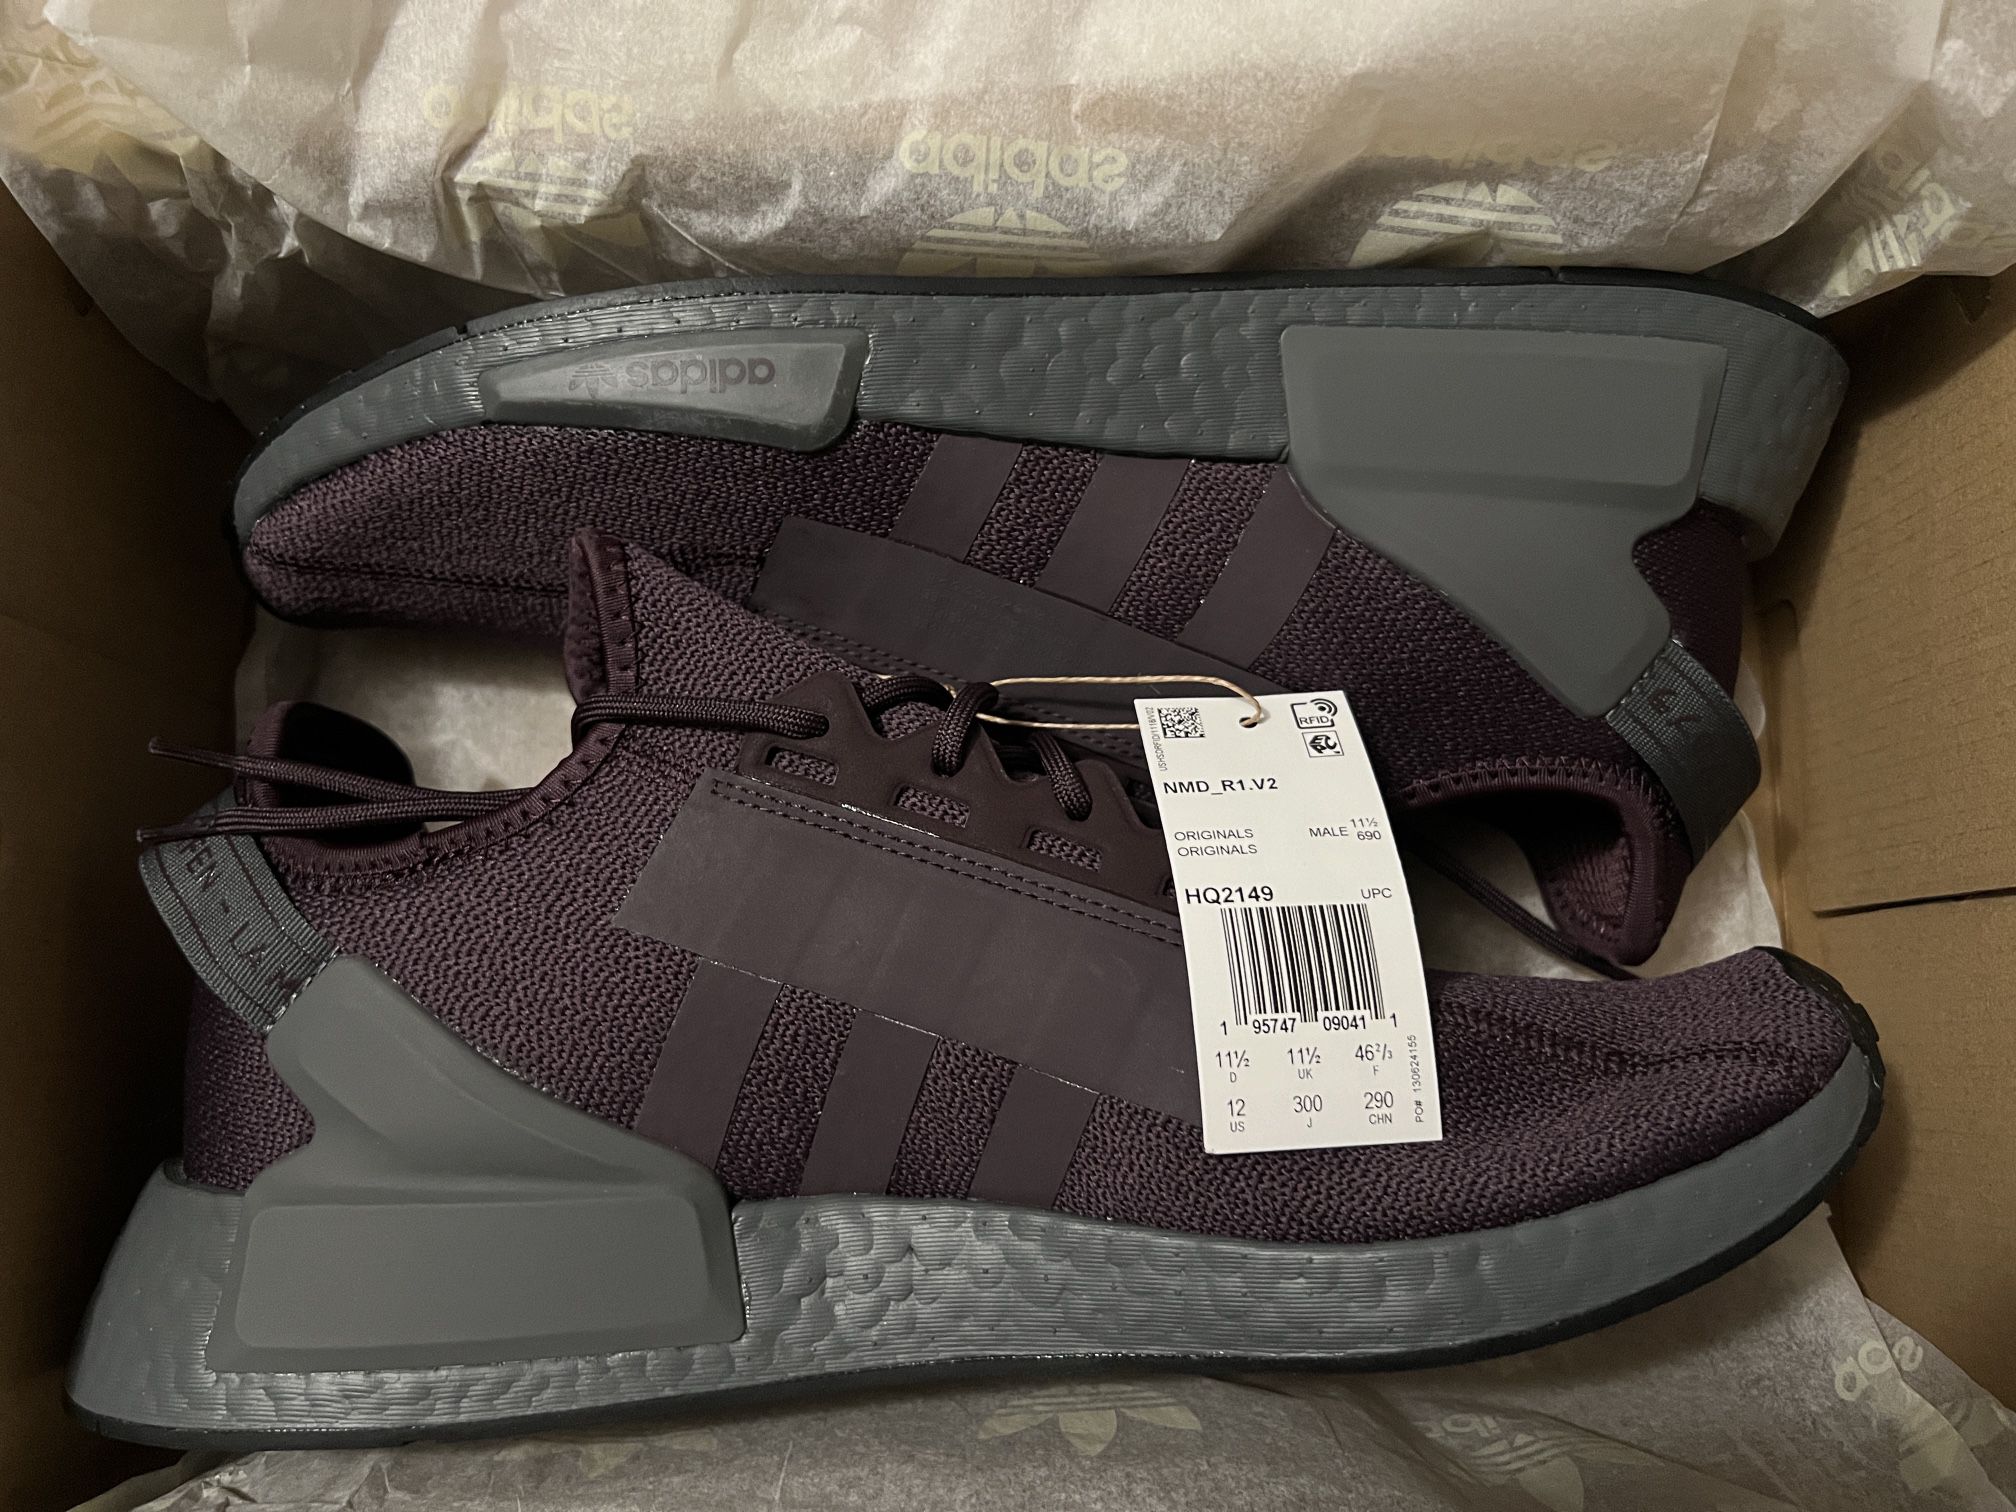 Adidas NMD R1 V2 Size 12 Shadow Maroon Sneakers NEW